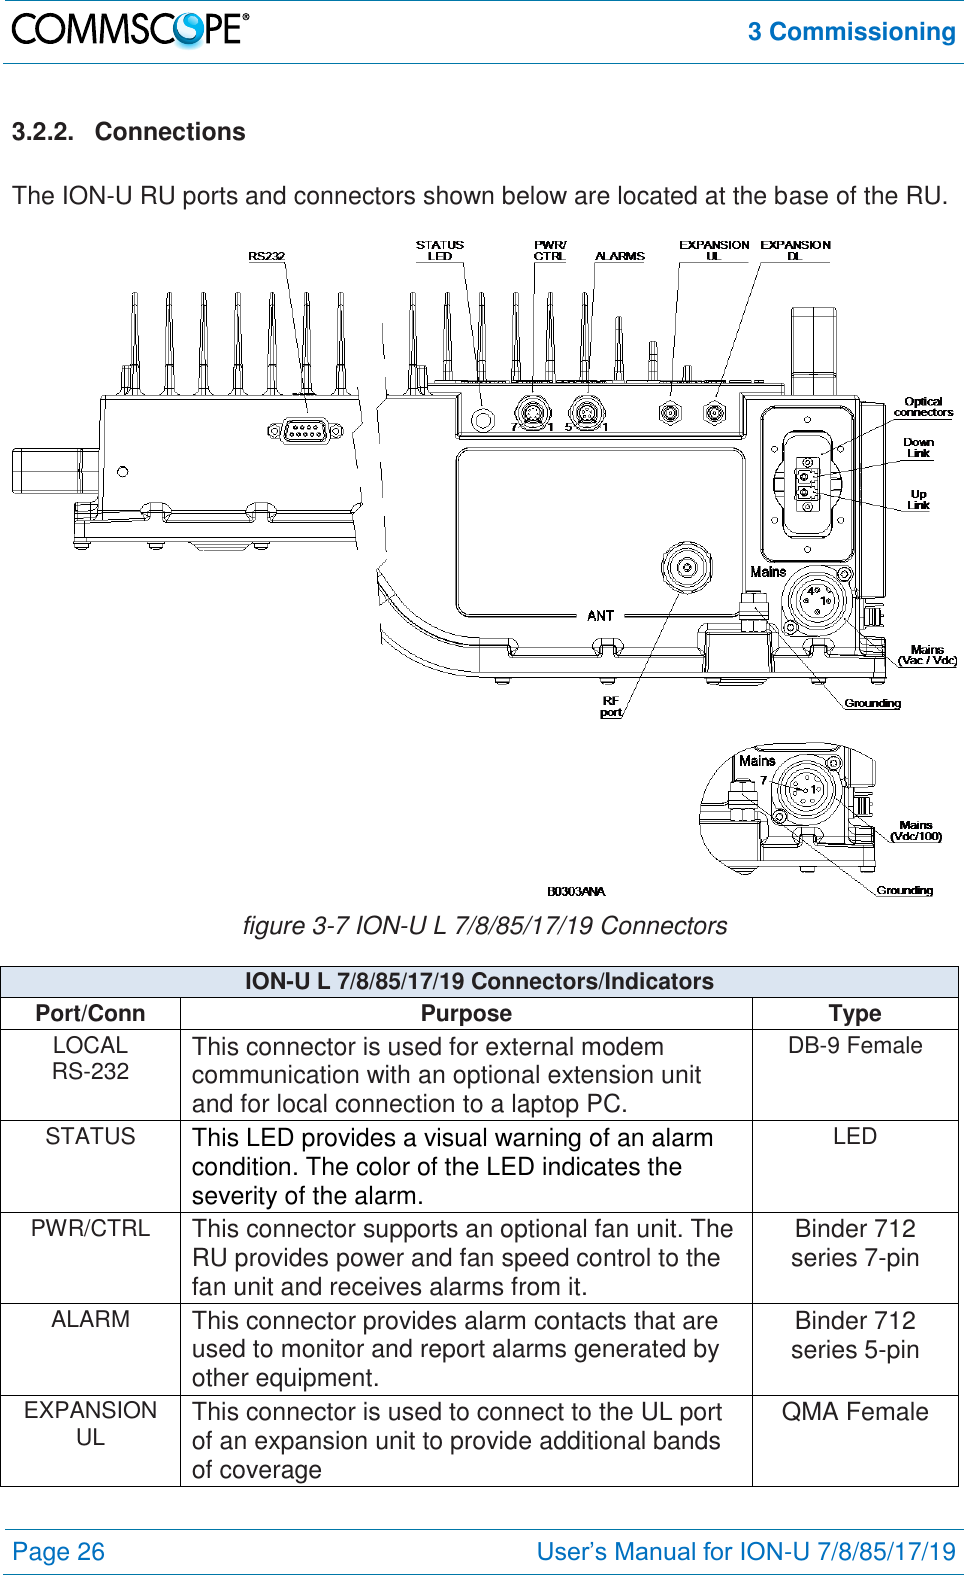  3 Commissioning  Page 26 User’s Manual for ION-U 7/8/85/17/19  3.2.2.  Connections  The ION-U RU ports and connectors shown below are located at the base of the RU.   figure 3-7 ION-U L 7/8/85/17/19 Connectors ION-U L 7/8/85/17/19 Connectors/Indicators Port/Conn Purpose Type LOCAL  RS-232 This connector is used for external modem communication with an optional extension unit and for local connection to a laptop PC. DB-9 Female STATUS This LED provides a visual warning of an alarm condition. The color of the LED indicates the severity of the alarm. LED PWR/CTRL This connector supports an optional fan unit. The RU provides power and fan speed control to the fan unit and receives alarms from it. Binder 712 series 7-pin ALARM This connector provides alarm contacts that are used to monitor and report alarms generated by other equipment. Binder 712 series 5-pin EXPANSION UL This connector is used to connect to the UL port of an expansion unit to provide additional bands of coverage QMA Female 